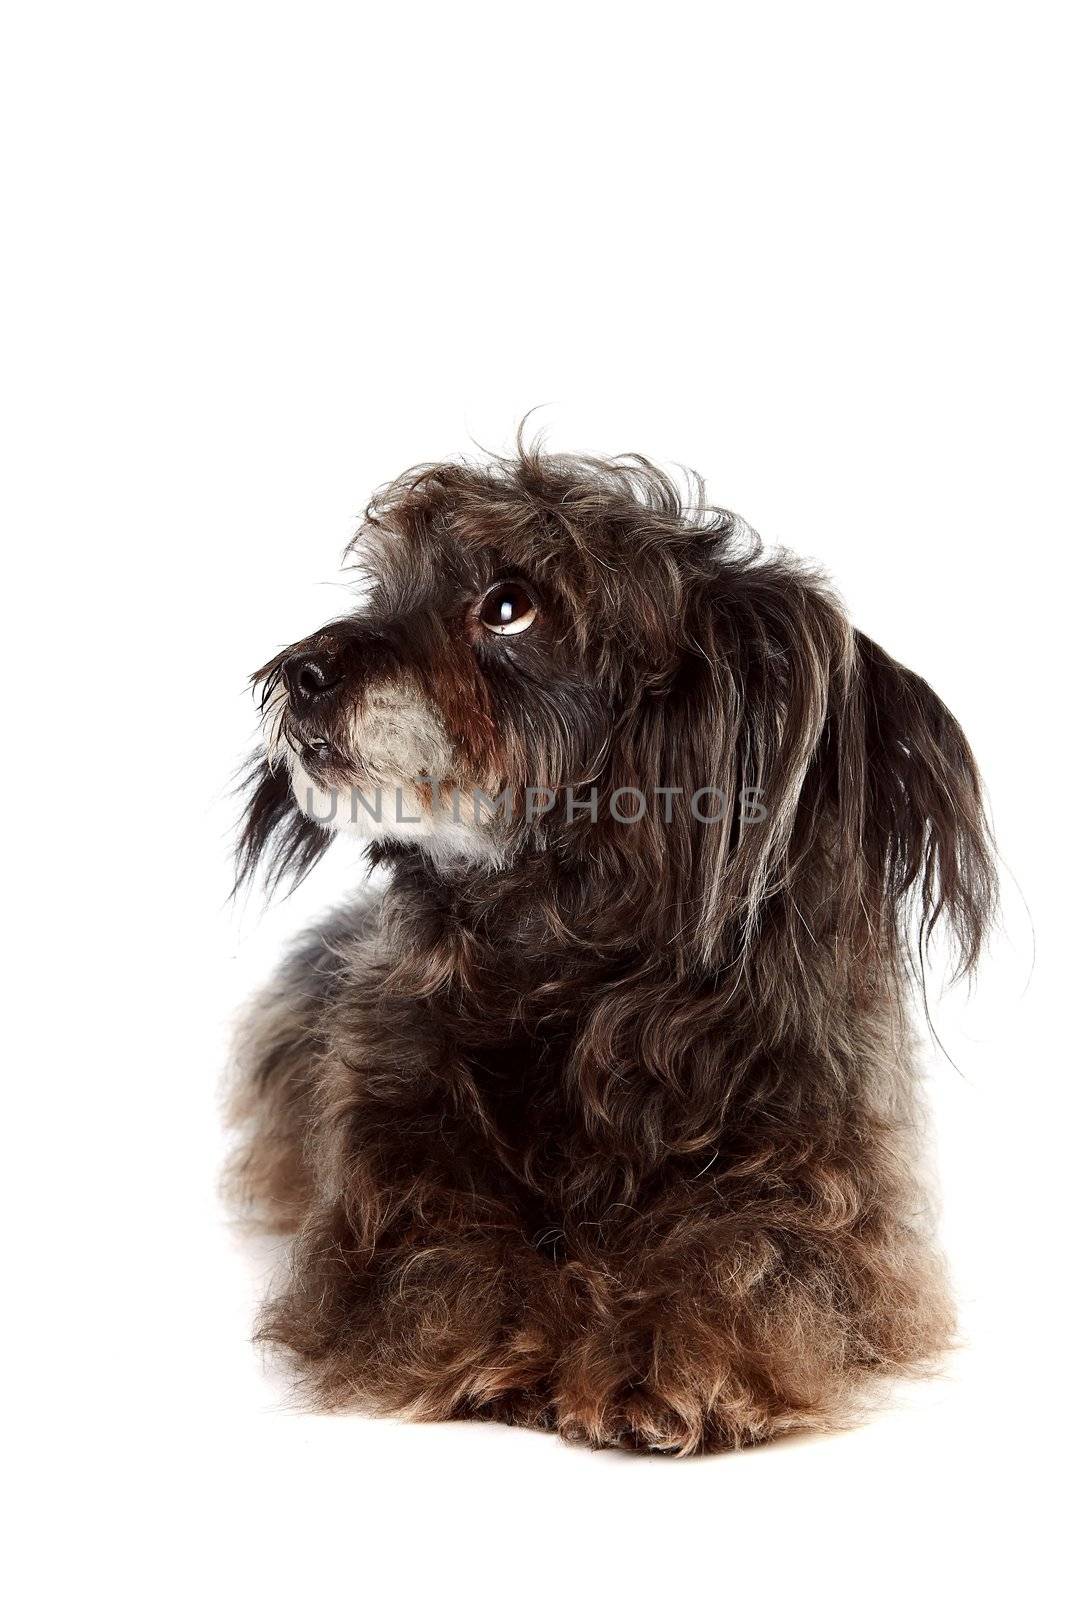 Small shaggy mongrel on a white background